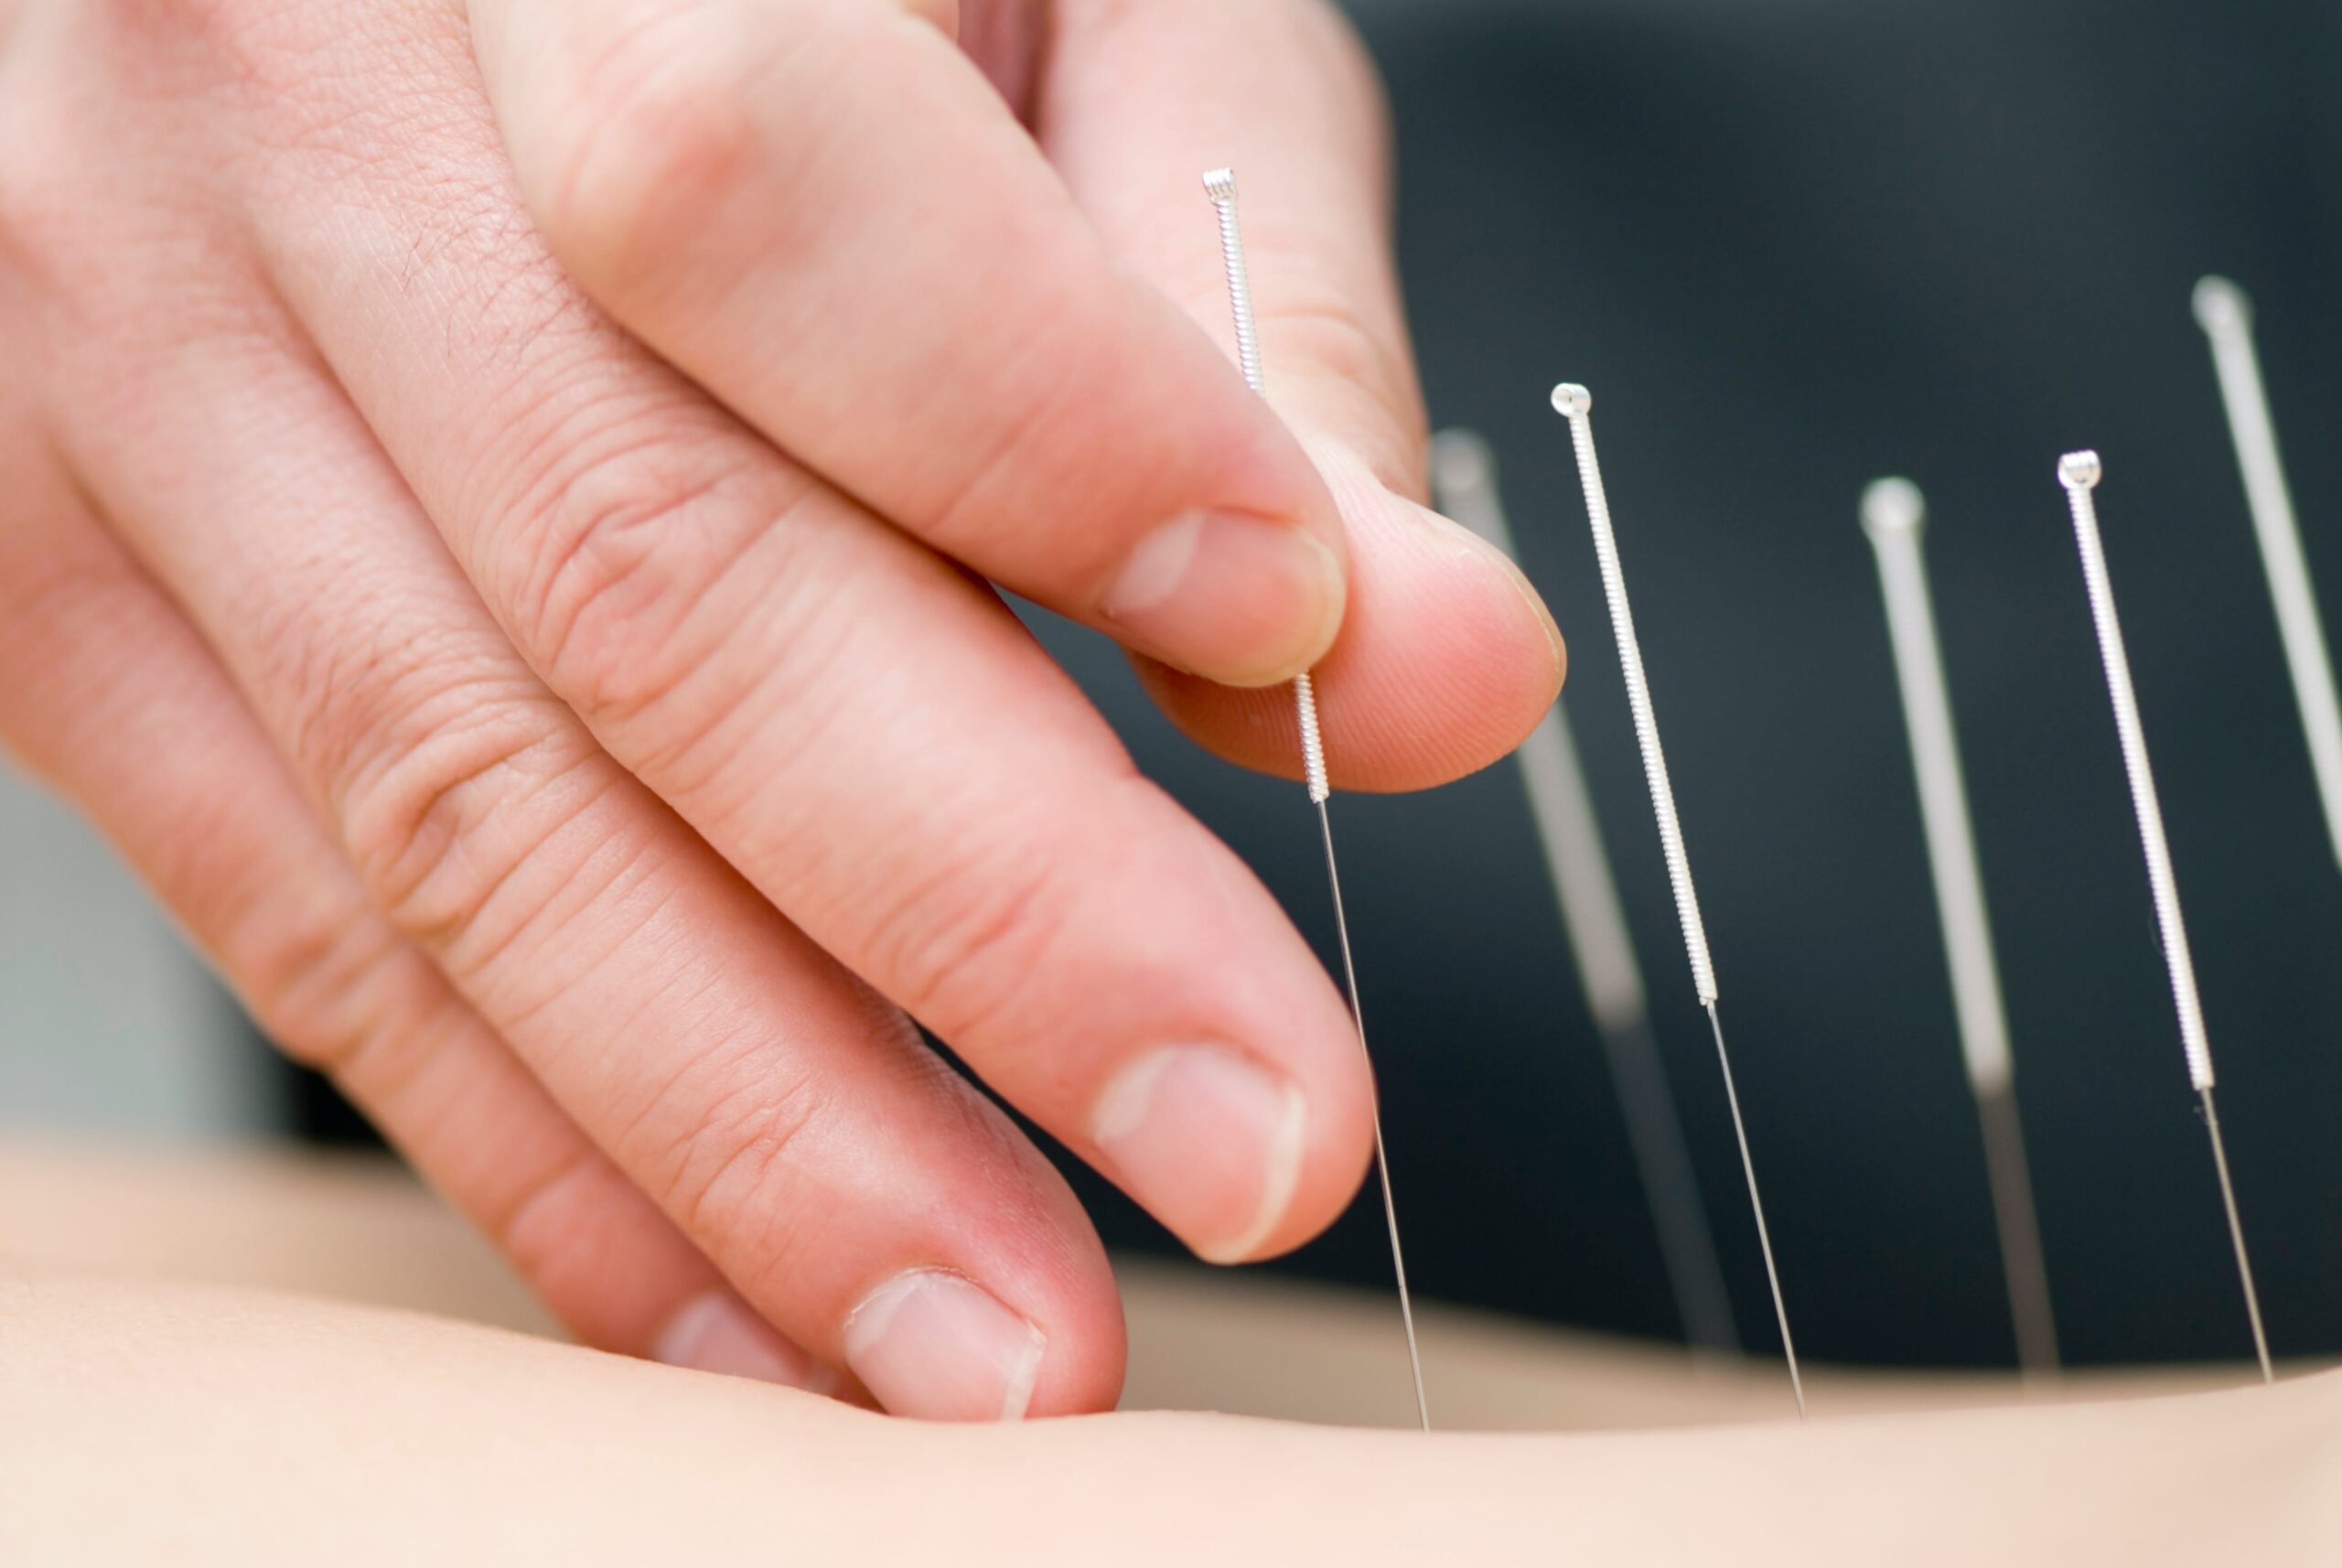 A person receiving acupuncture treatment for back pain.